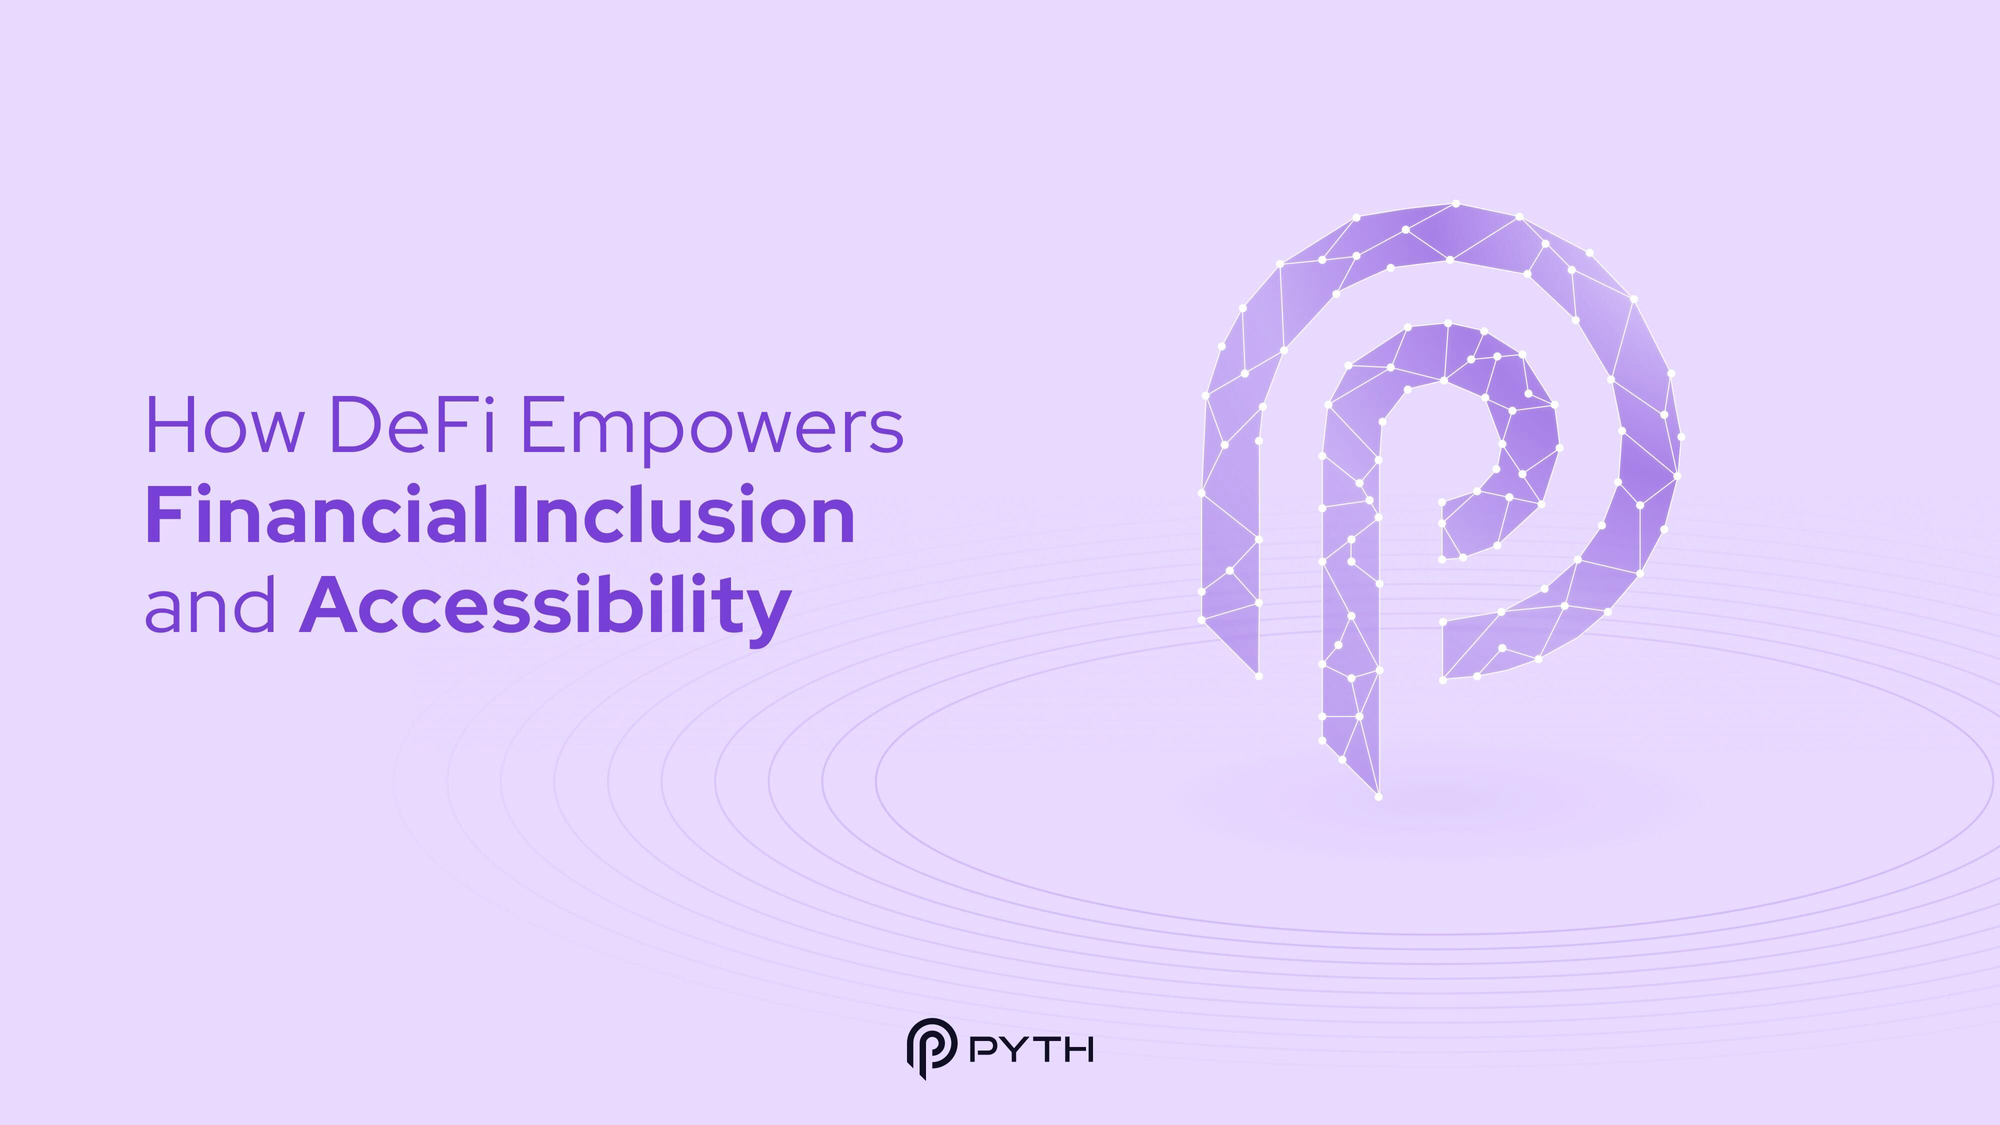 How DeFi Empowers Financial Inclusion and Accessibility